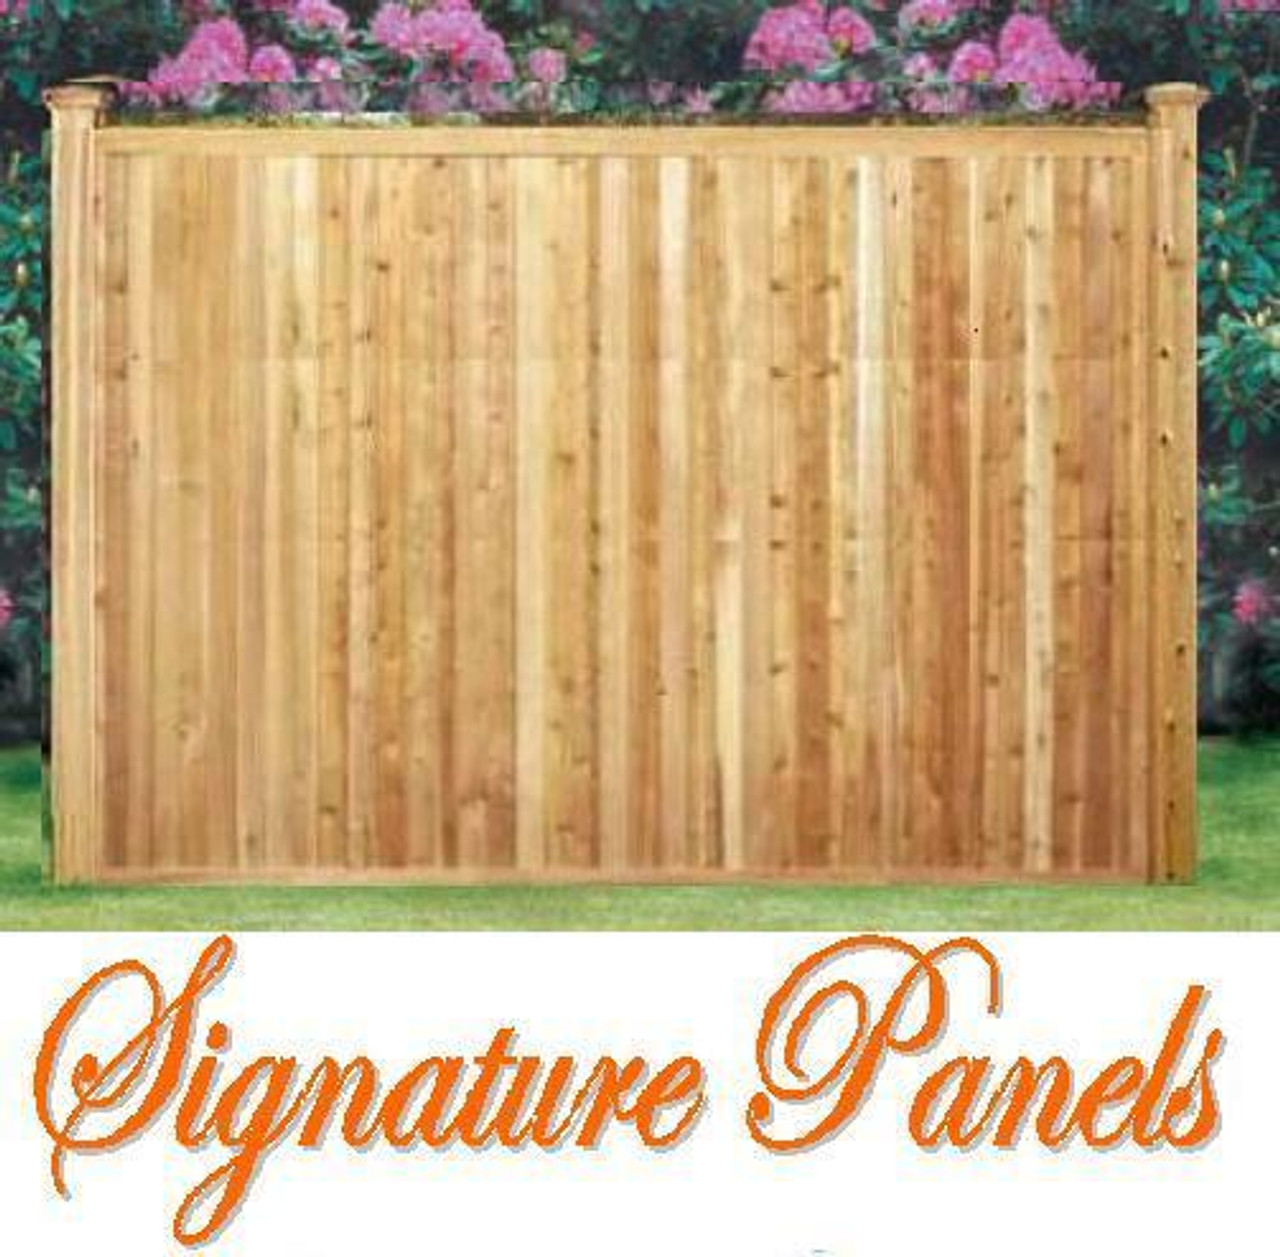 BRANFORD Good Neighbor, Cedar Fence - V-match Premium Panels Pre-Built with TandG Boards, 6ft H x 8ft W, both sides finished as shown in picture